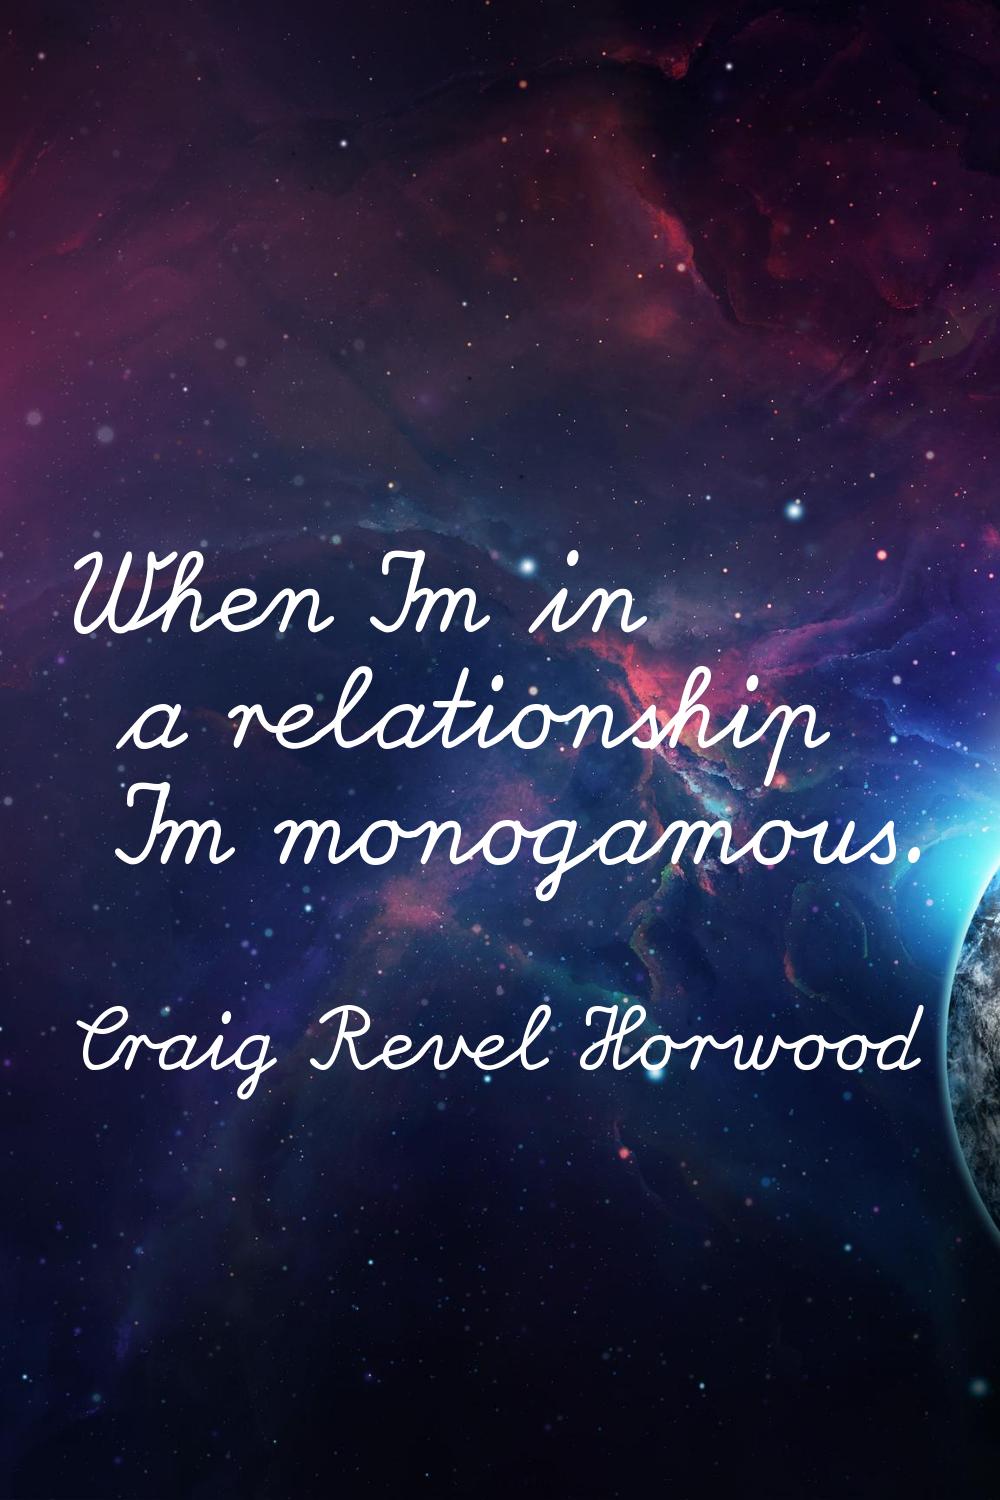 When I'm in a relationship I'm monogamous.